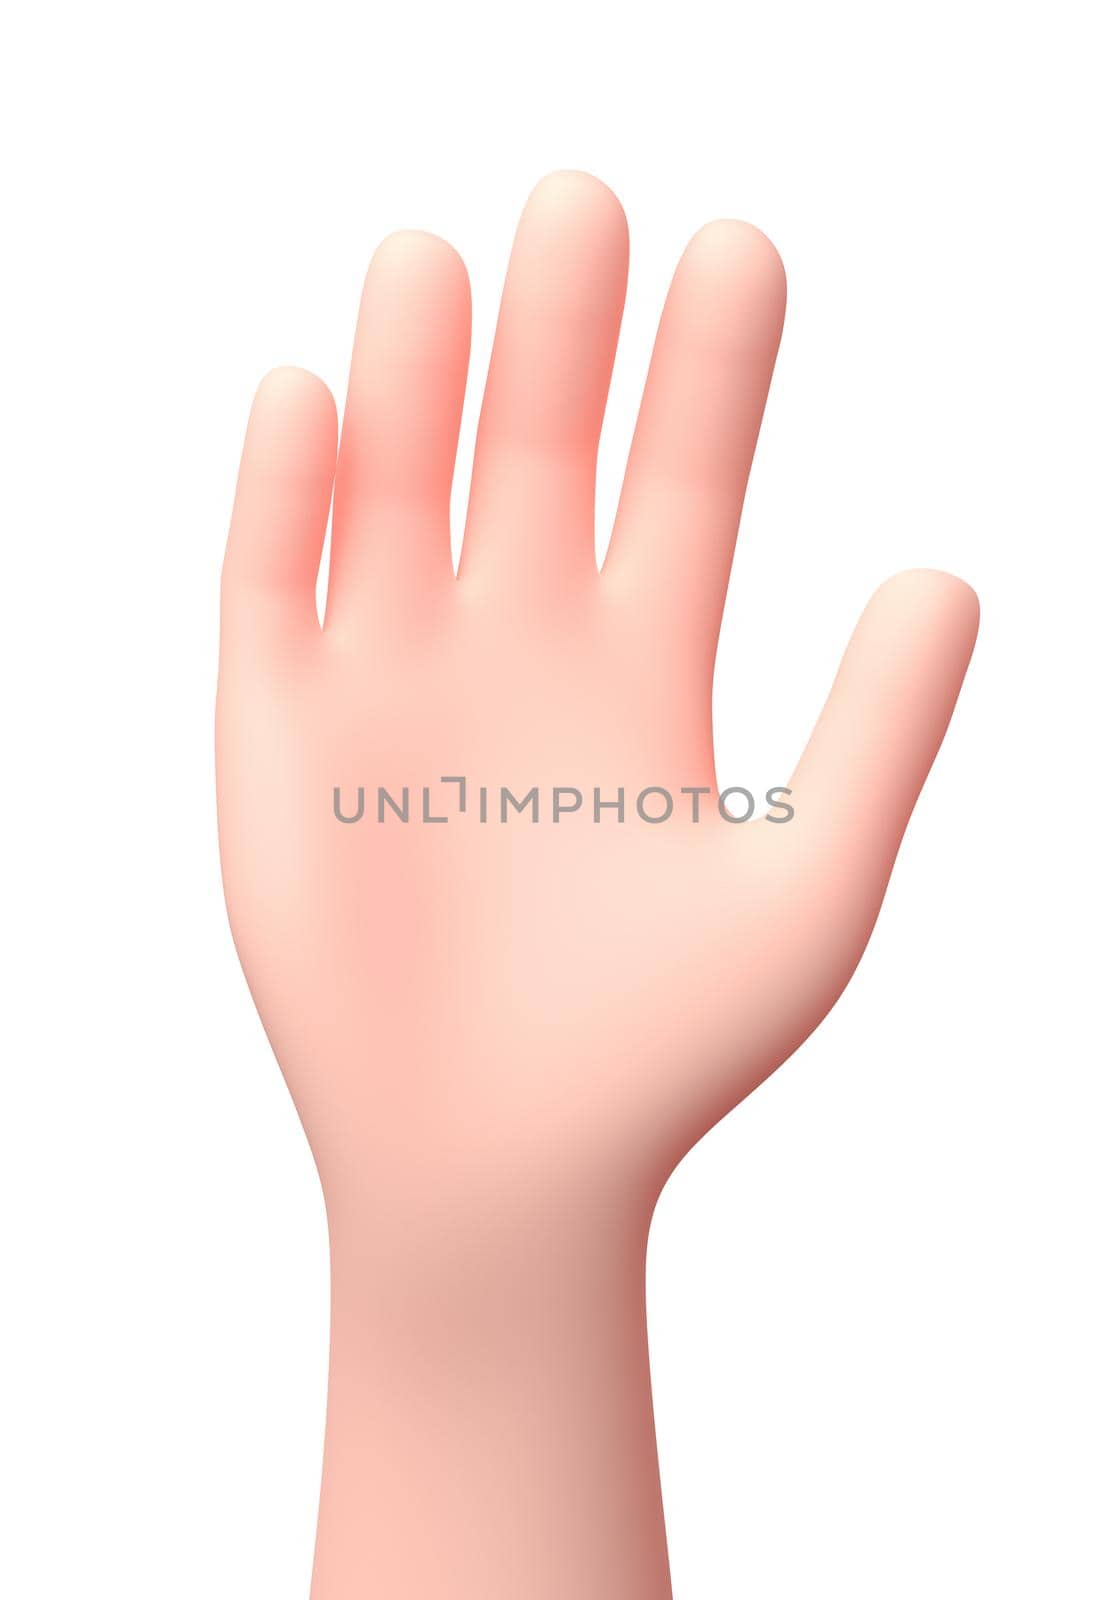 Upraised Hand. 3D Cartoon Character. Isolated on White Background 3D Illustration